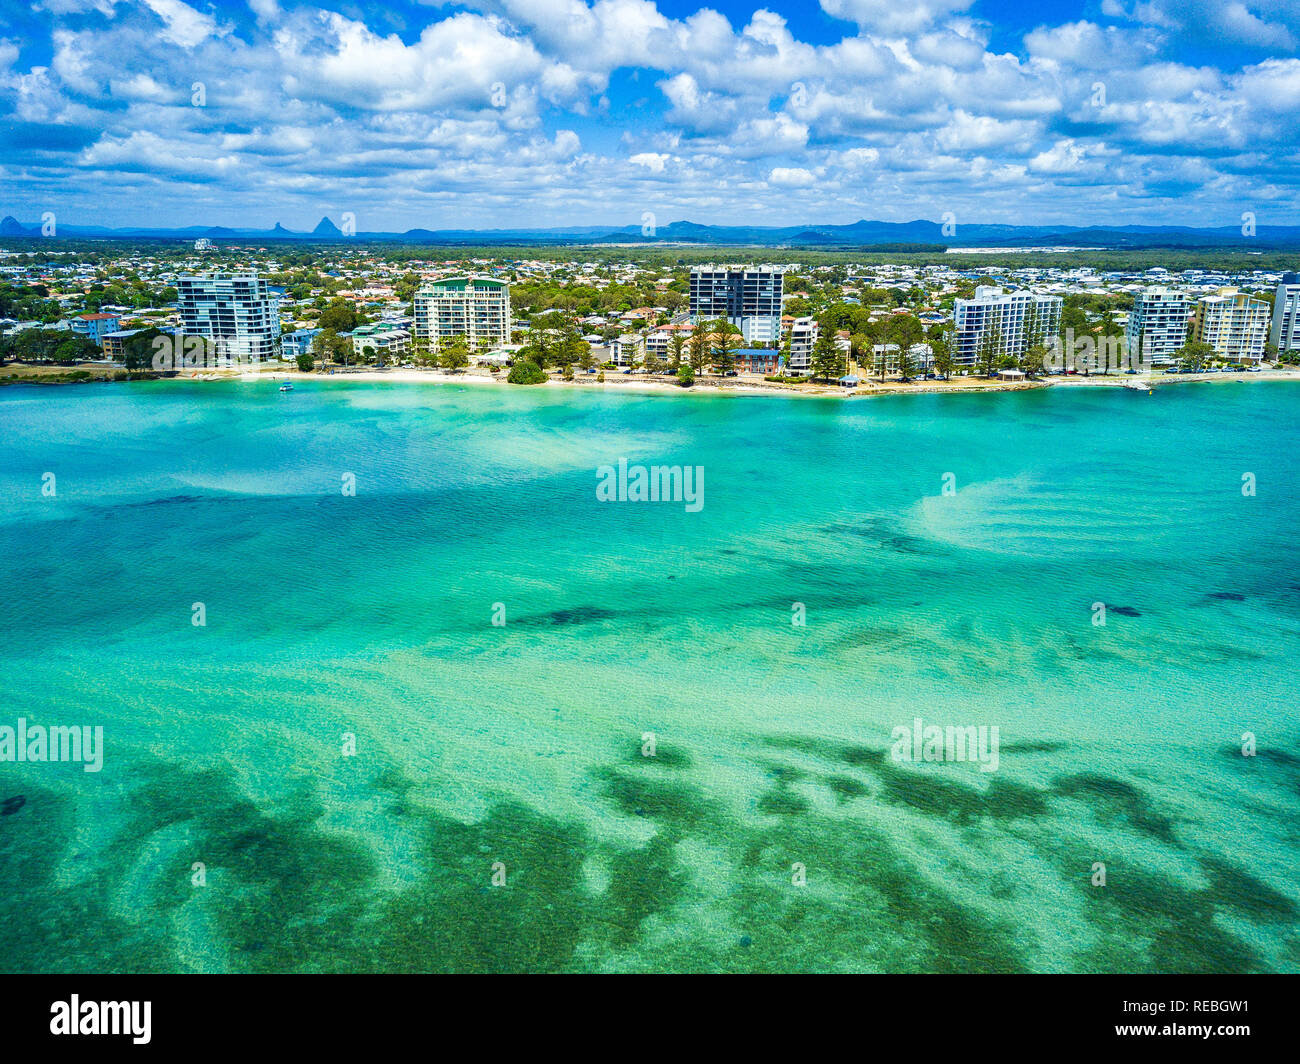 Aerial view of Golden Beach and the Caloundra area across through the Pumicestone Passage on the Sunshine Coast in Queensland, Australia. Stock Photo